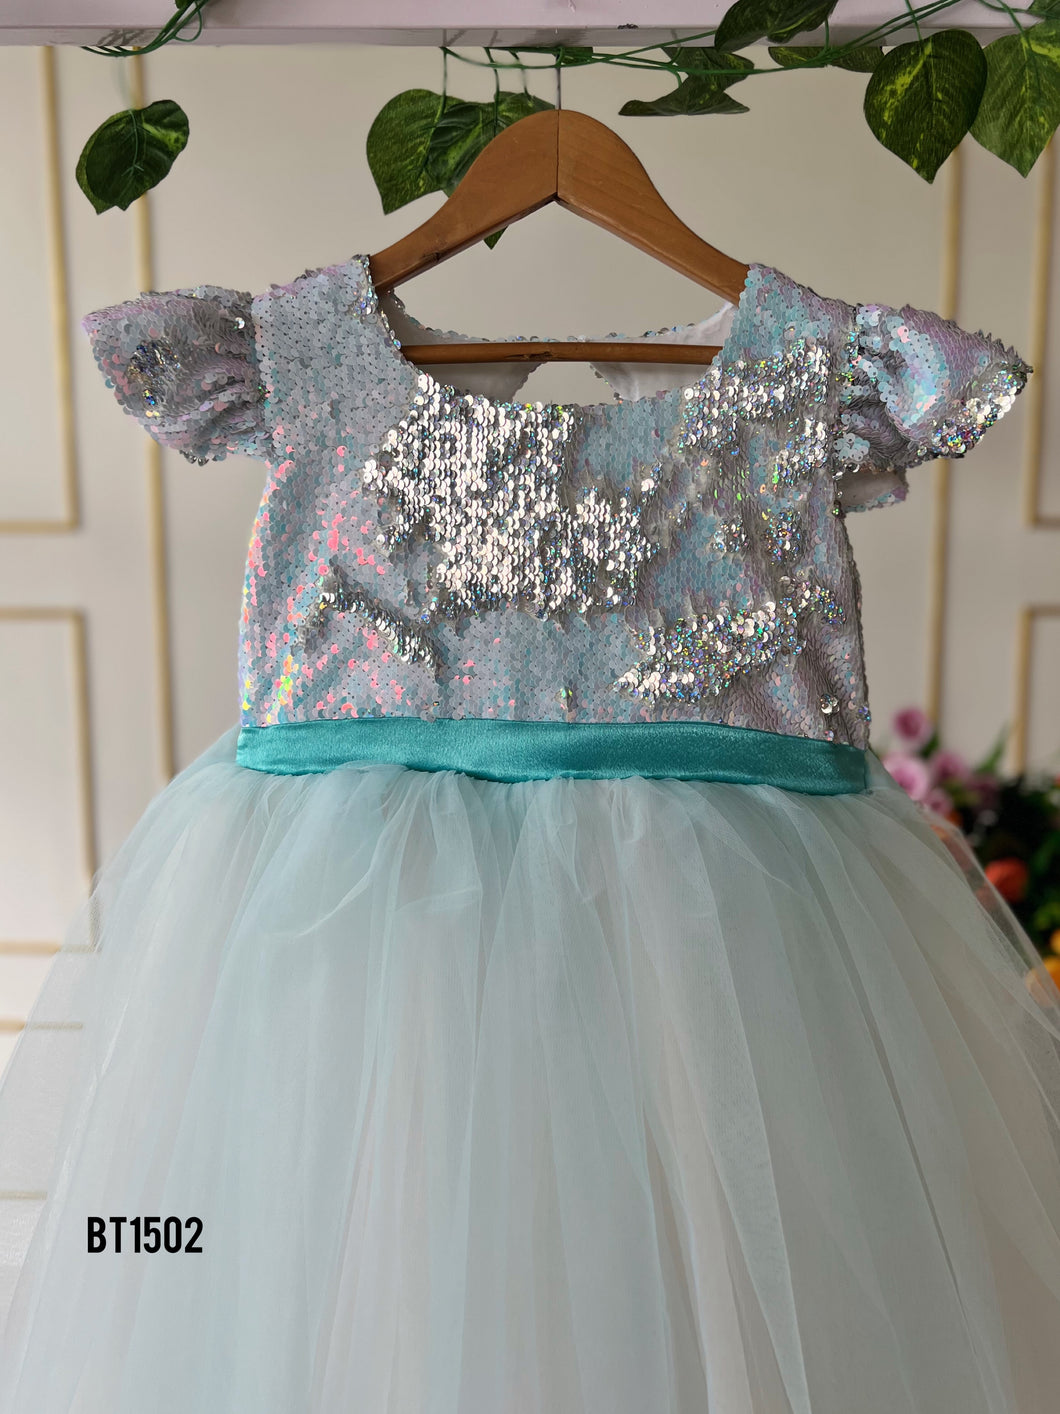 BT1502 Mermaid Sequence Bling Frock